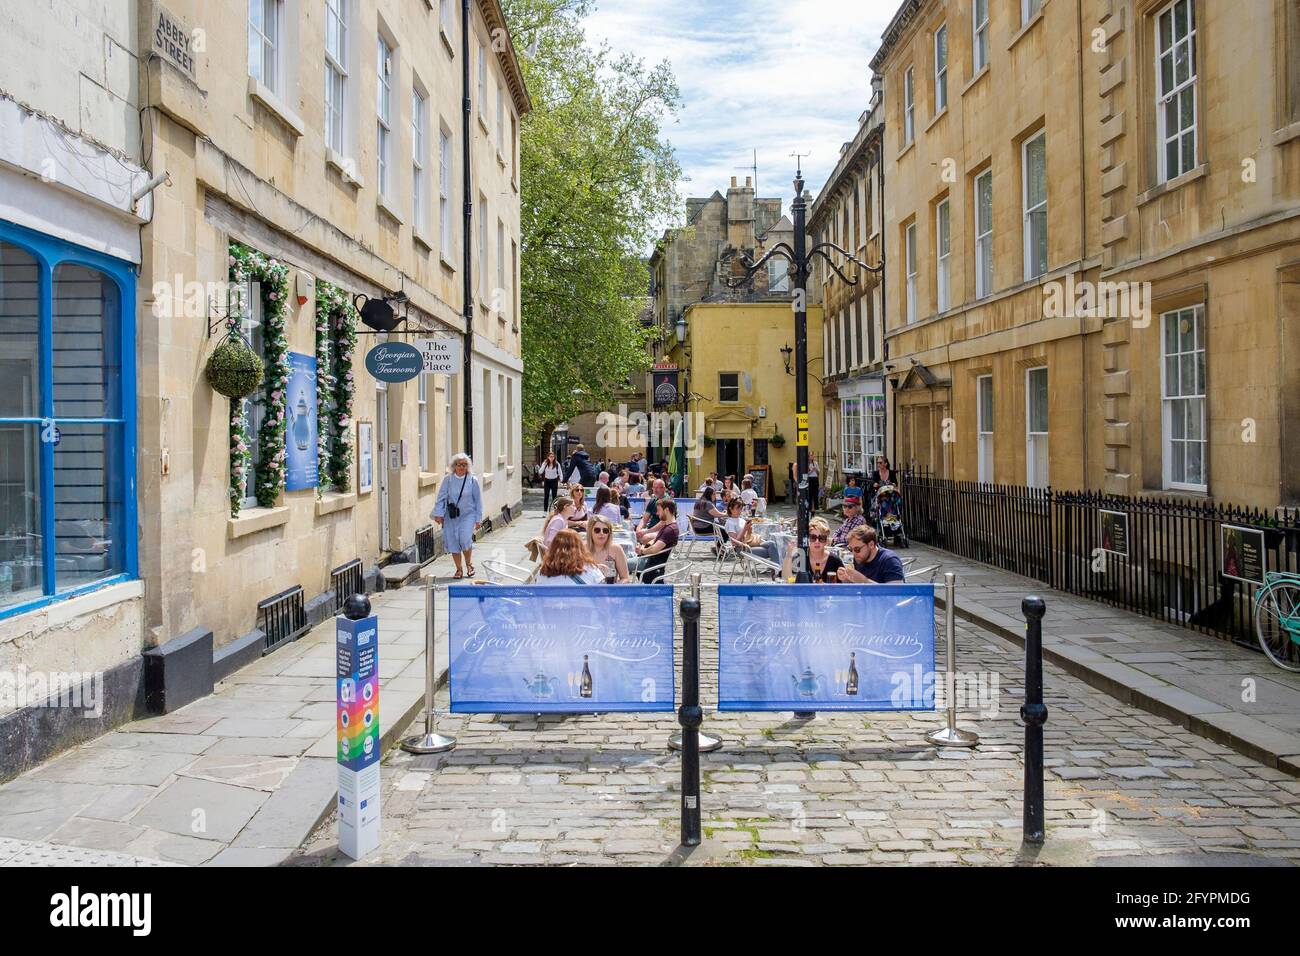 Bath, Somerset, UK. 29th May, 2021. Customers are pictured sitting outside and enjoying an afternnon drink in the centre of Bath. Crowds of shoppers filled the streets as people made the most of the bank holiday weekend sunshine. Credit: Lynchpics/Alamy Live News Stock Photo